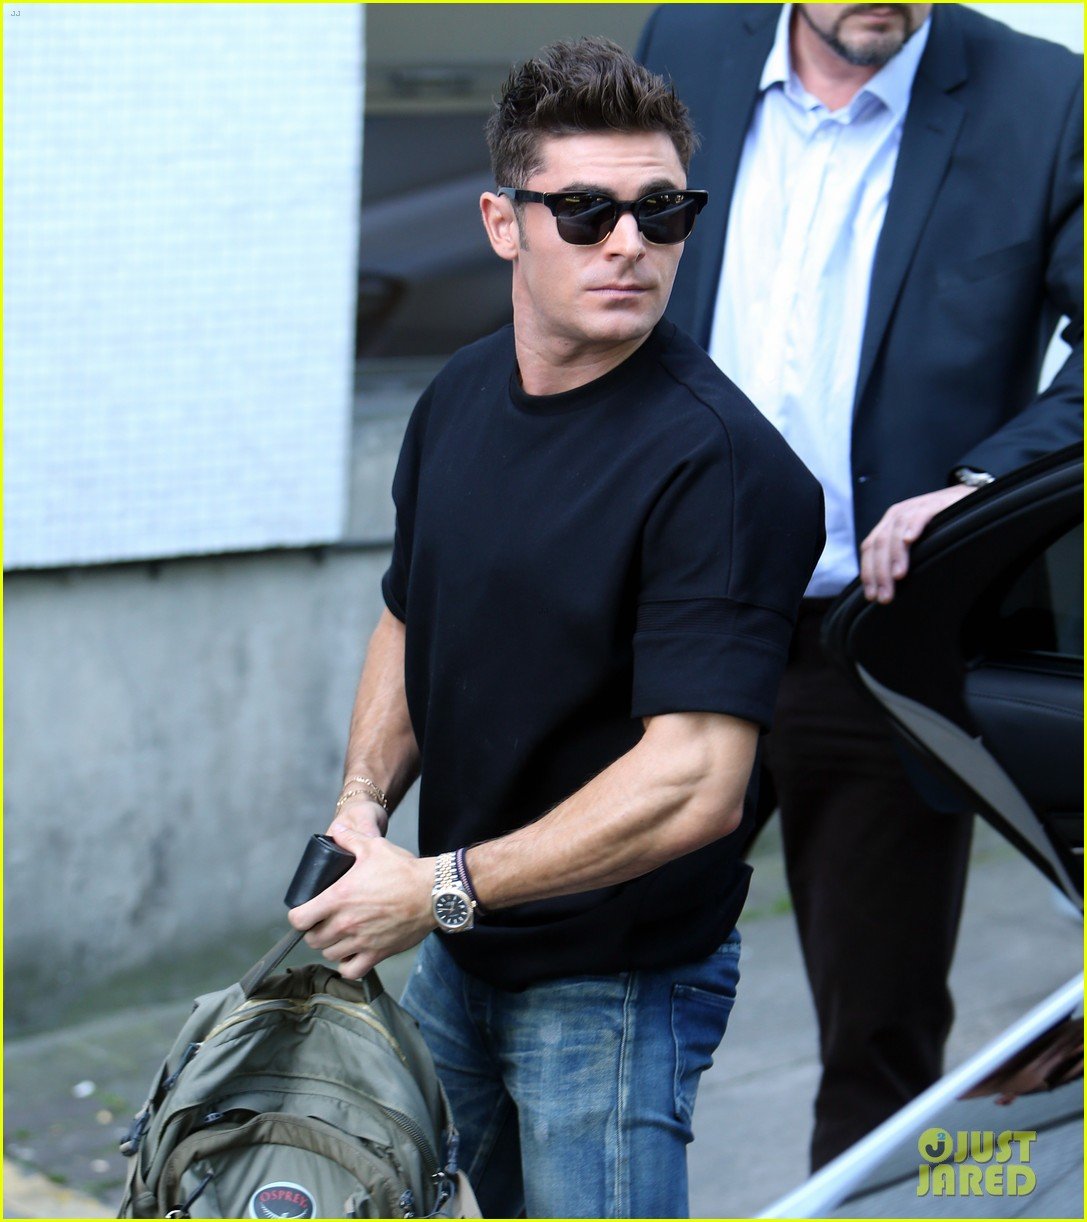 Zac Efron 'Messed Up His Ankles' Learning to Walk in Heels For ...